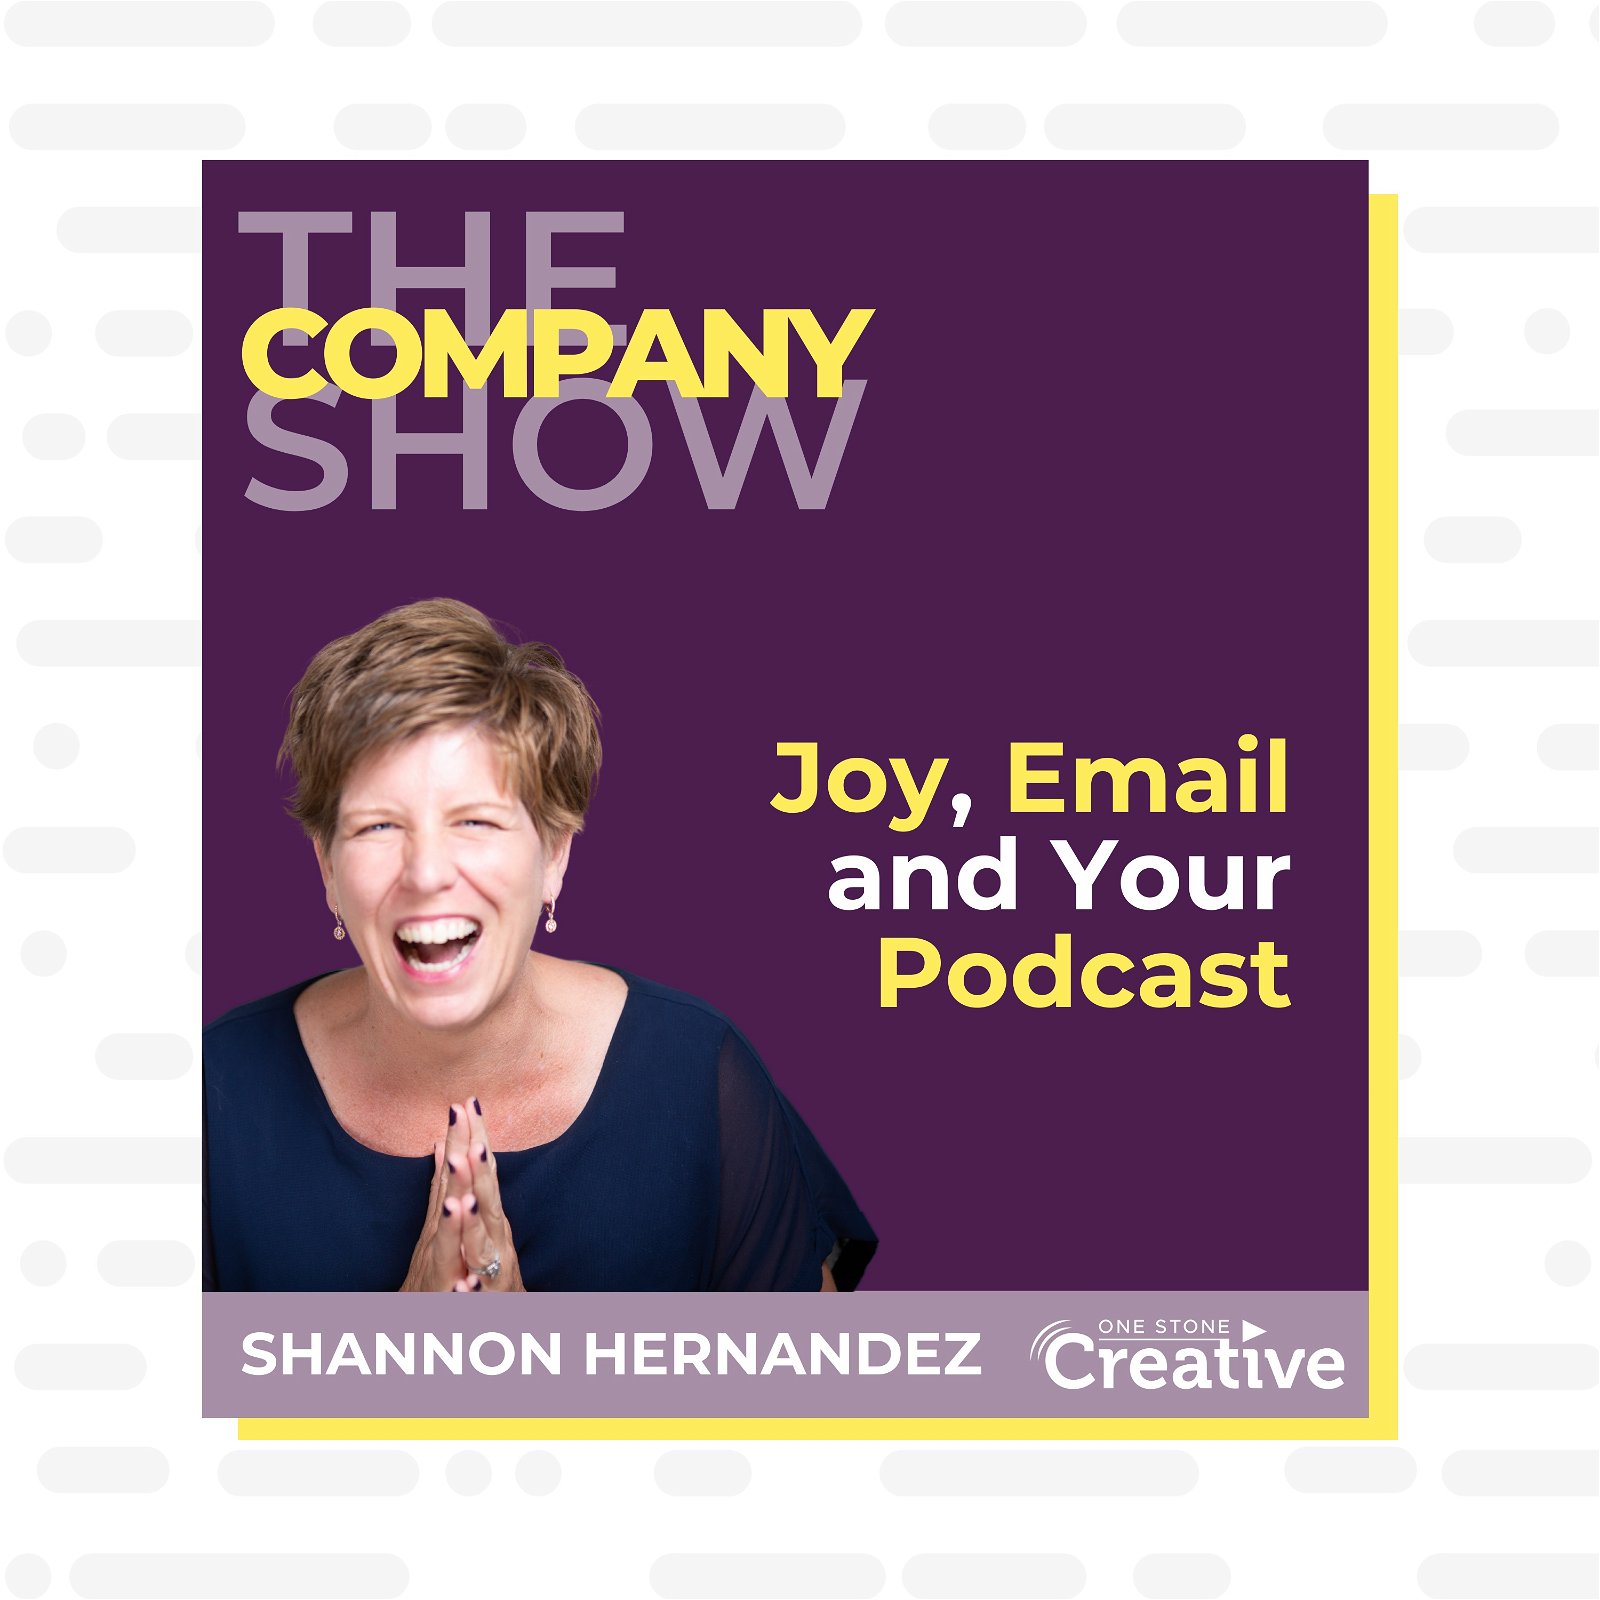 Joy, Email and Your Podcast with Shannon Hernandez